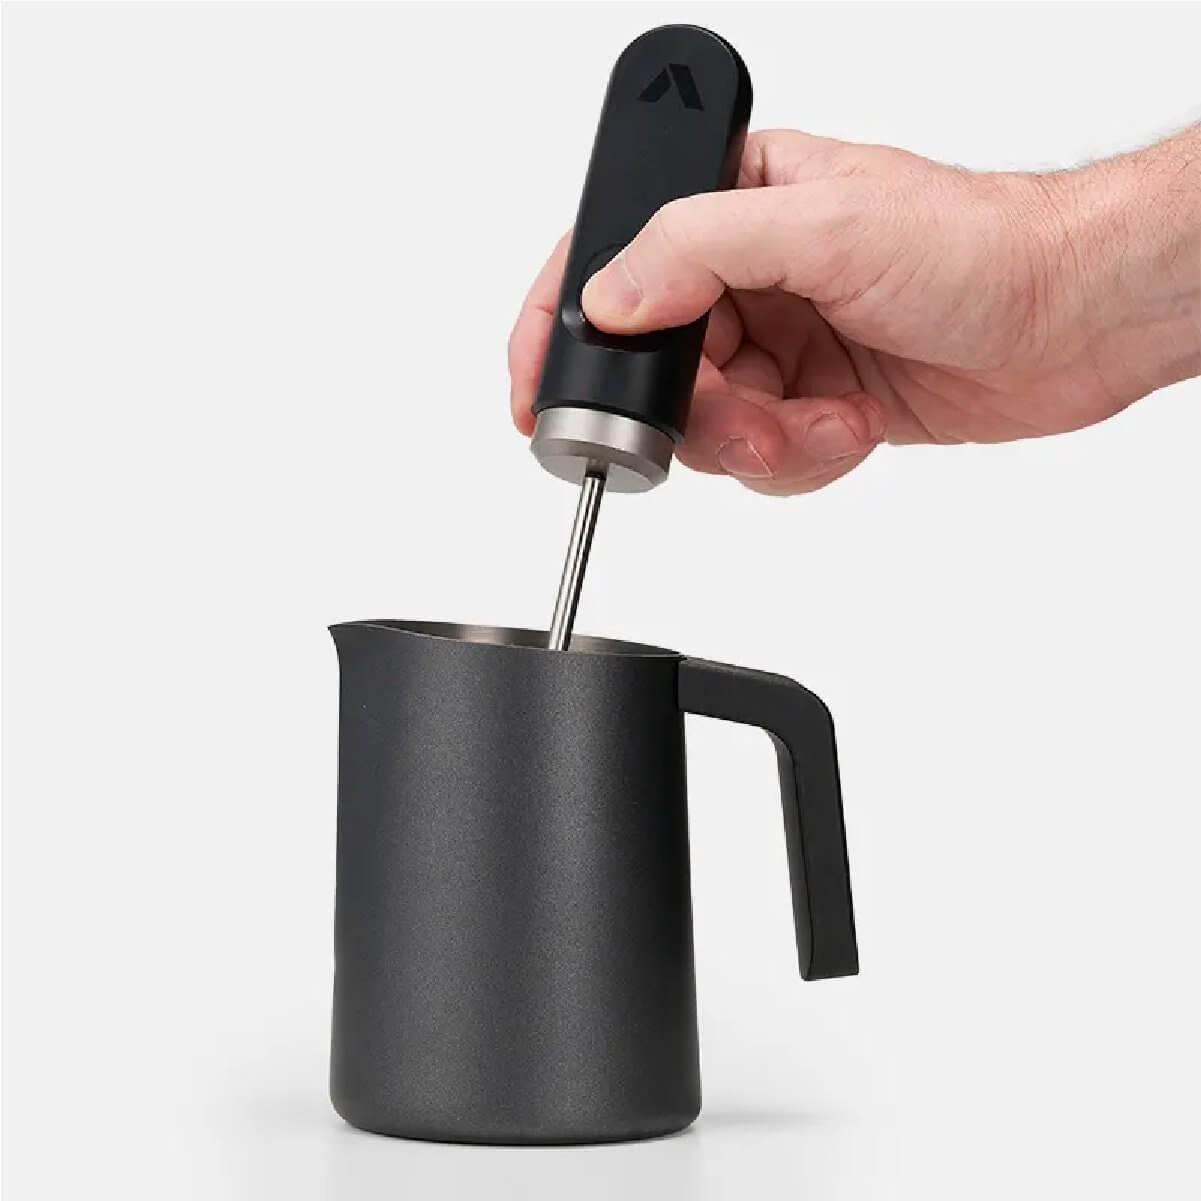 Nanofoamer / Milk Frother - by Subminimal Kitchen Subminimal Prettycleanshop